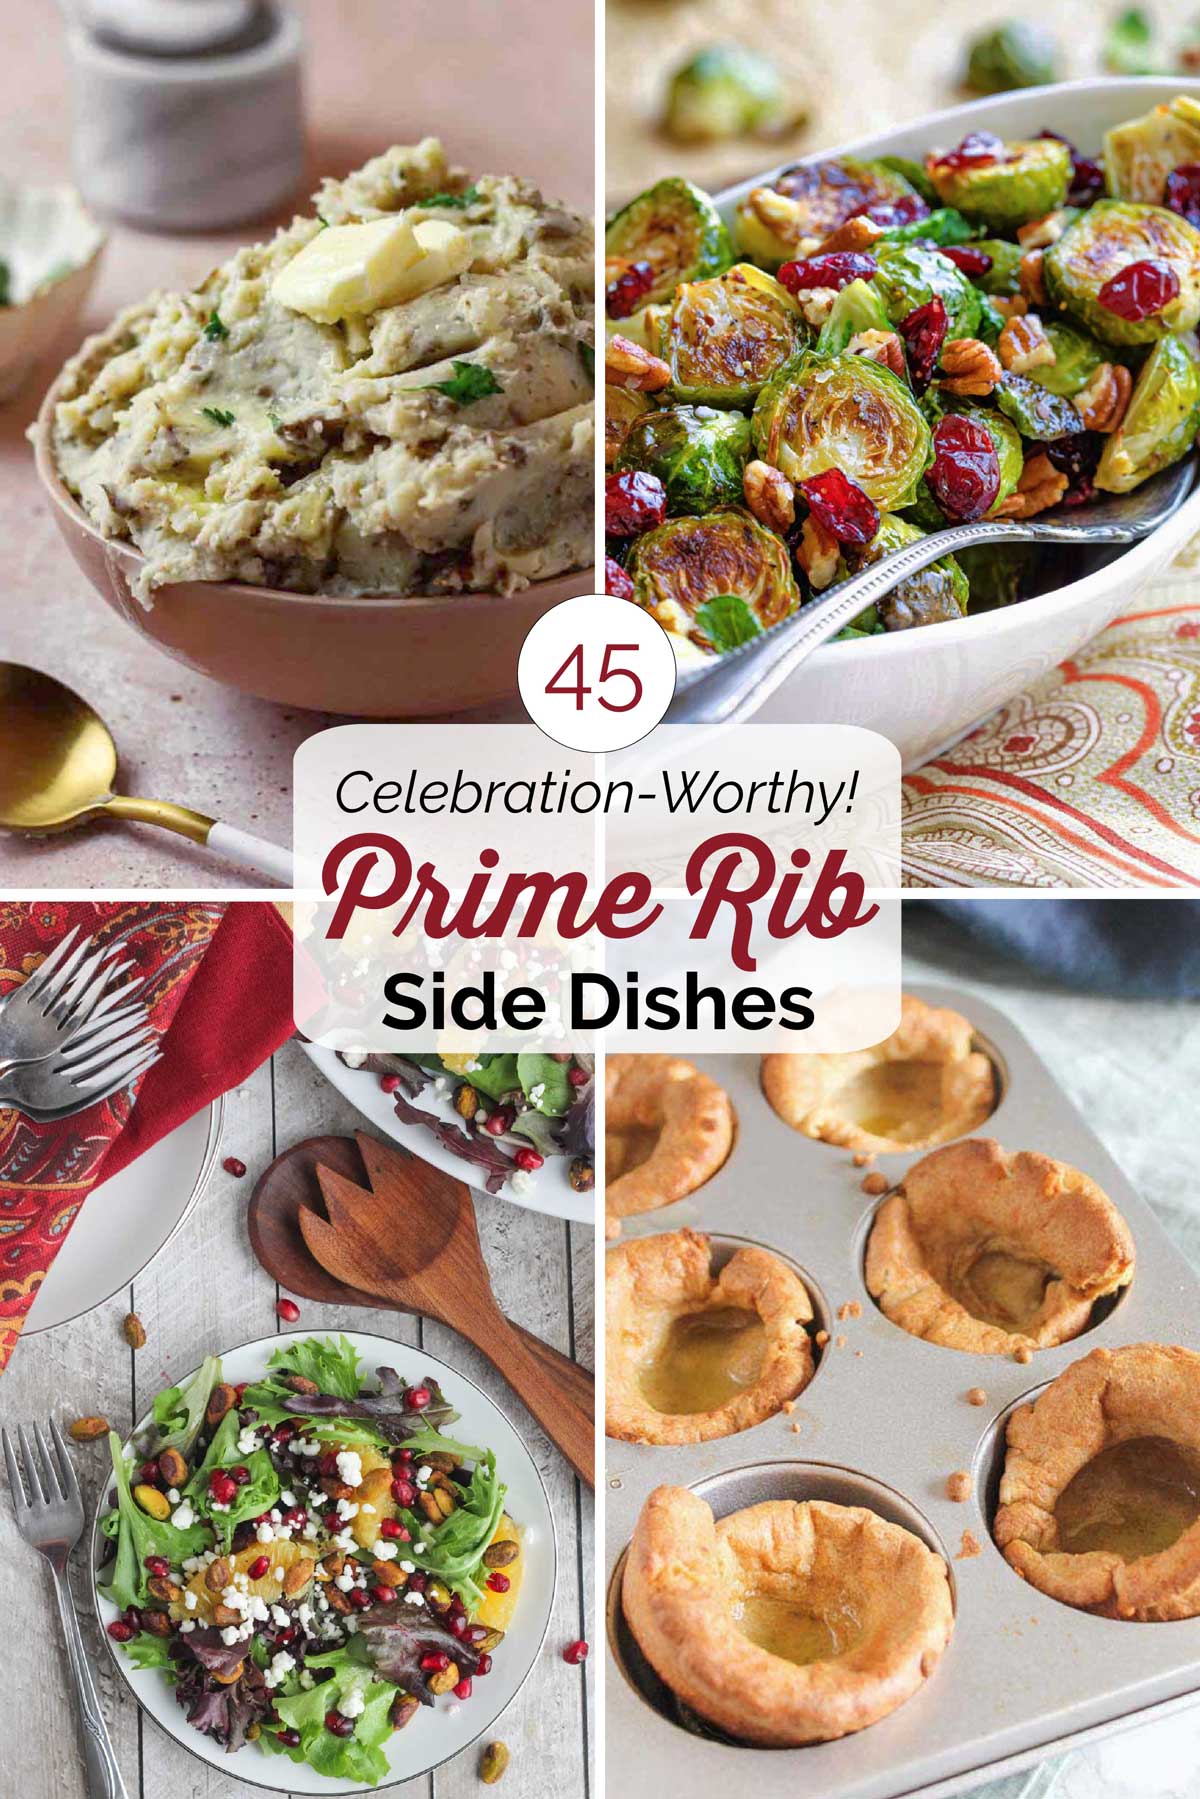 Hero collage with 4 recipe pictures and central text overlay reading "45 Celebration-Worthy Prime Rib Side Dishes".